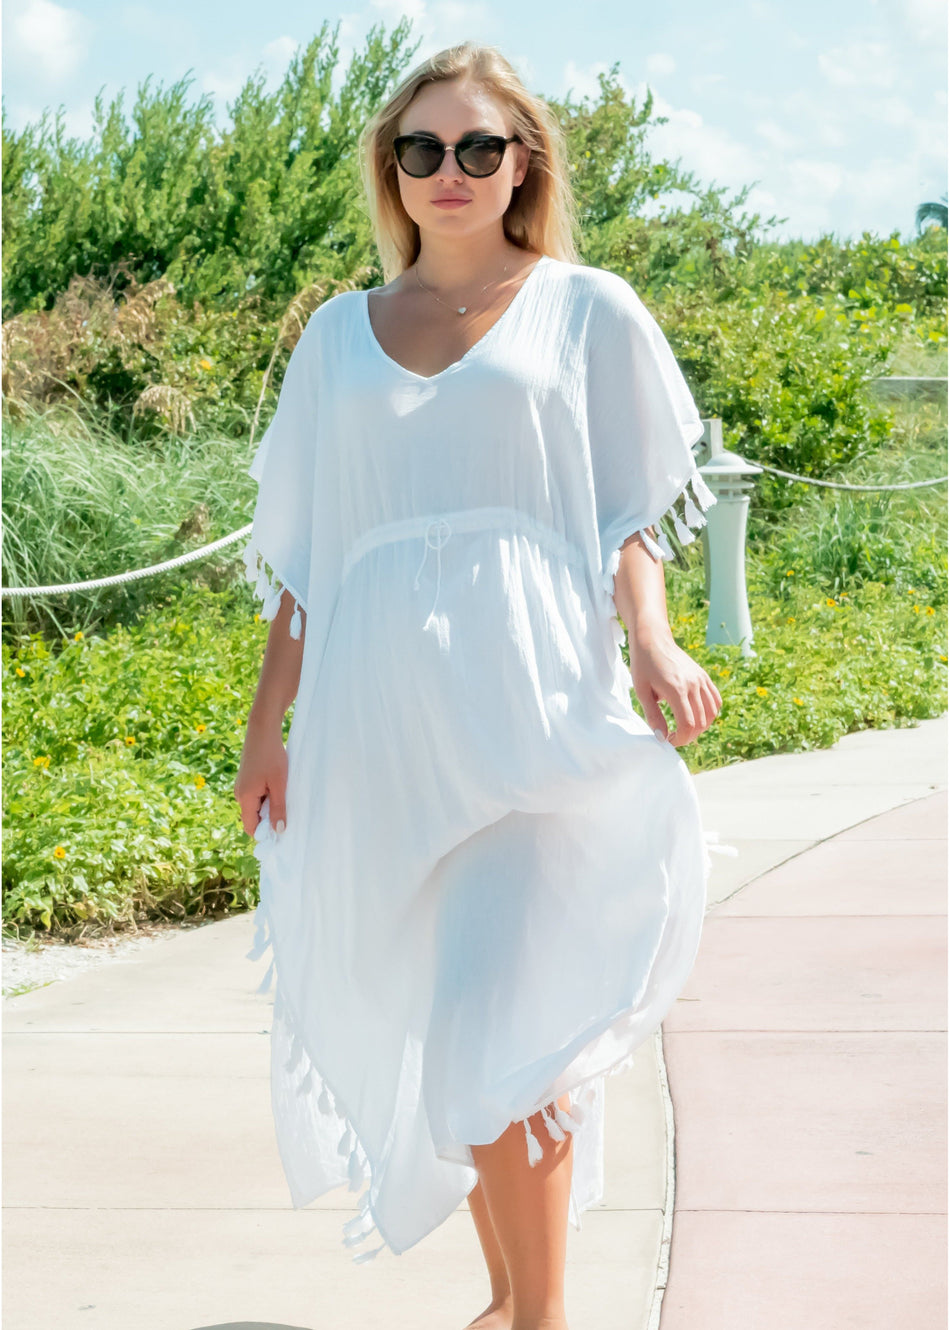 NW1251 - White Cotton Cover-Up